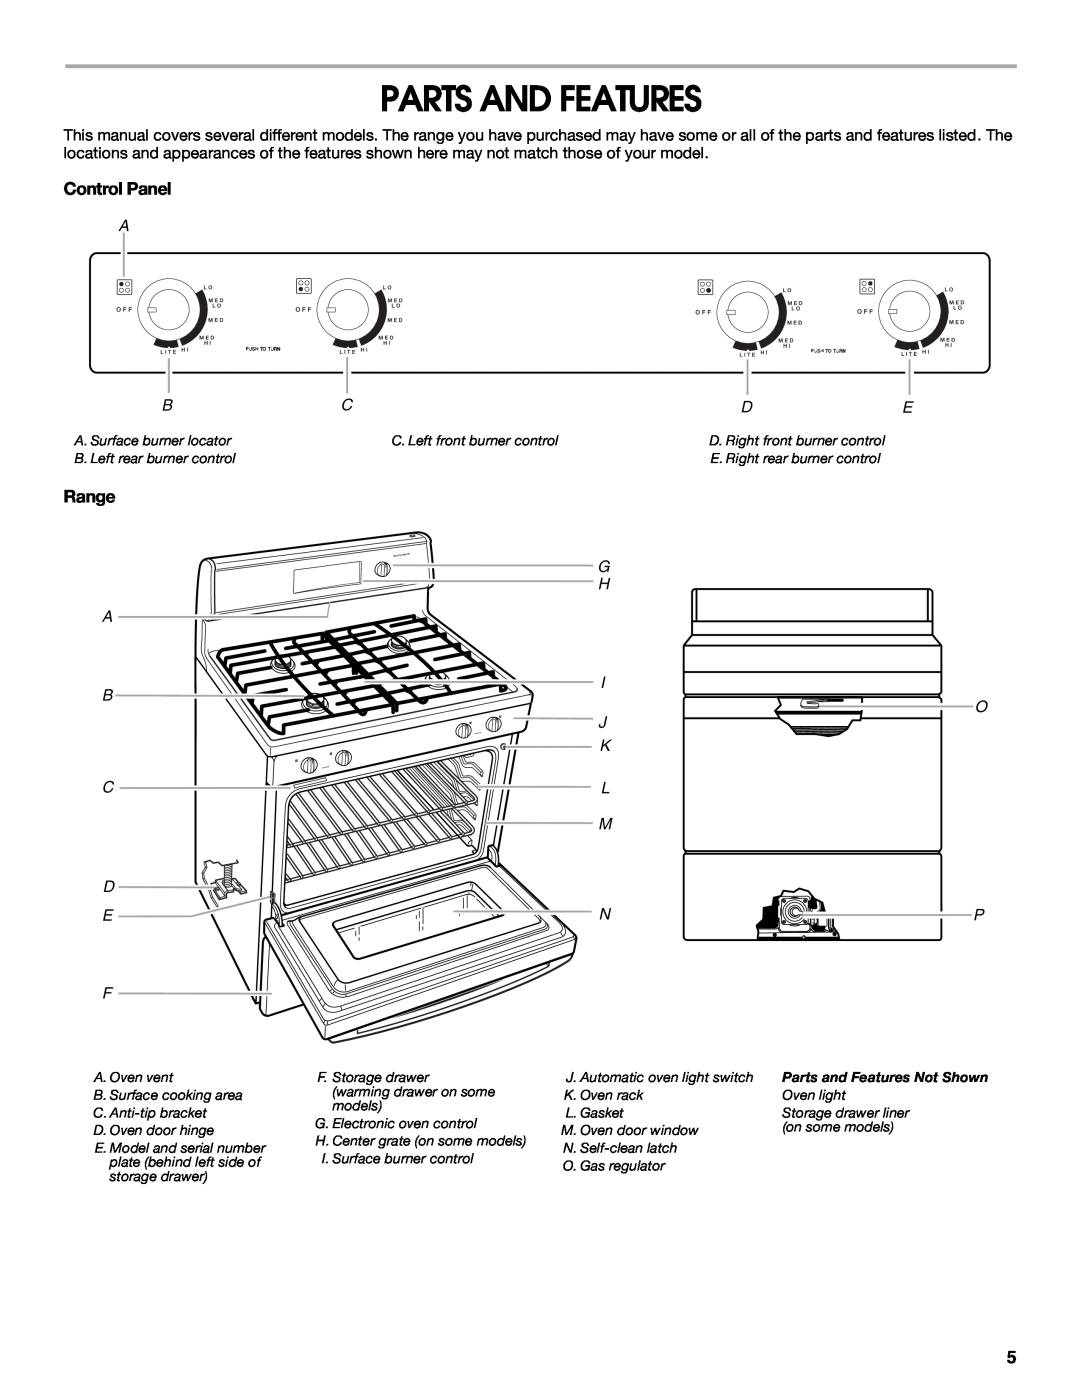 IKEA Range manual Parts And Features, Control Panel 